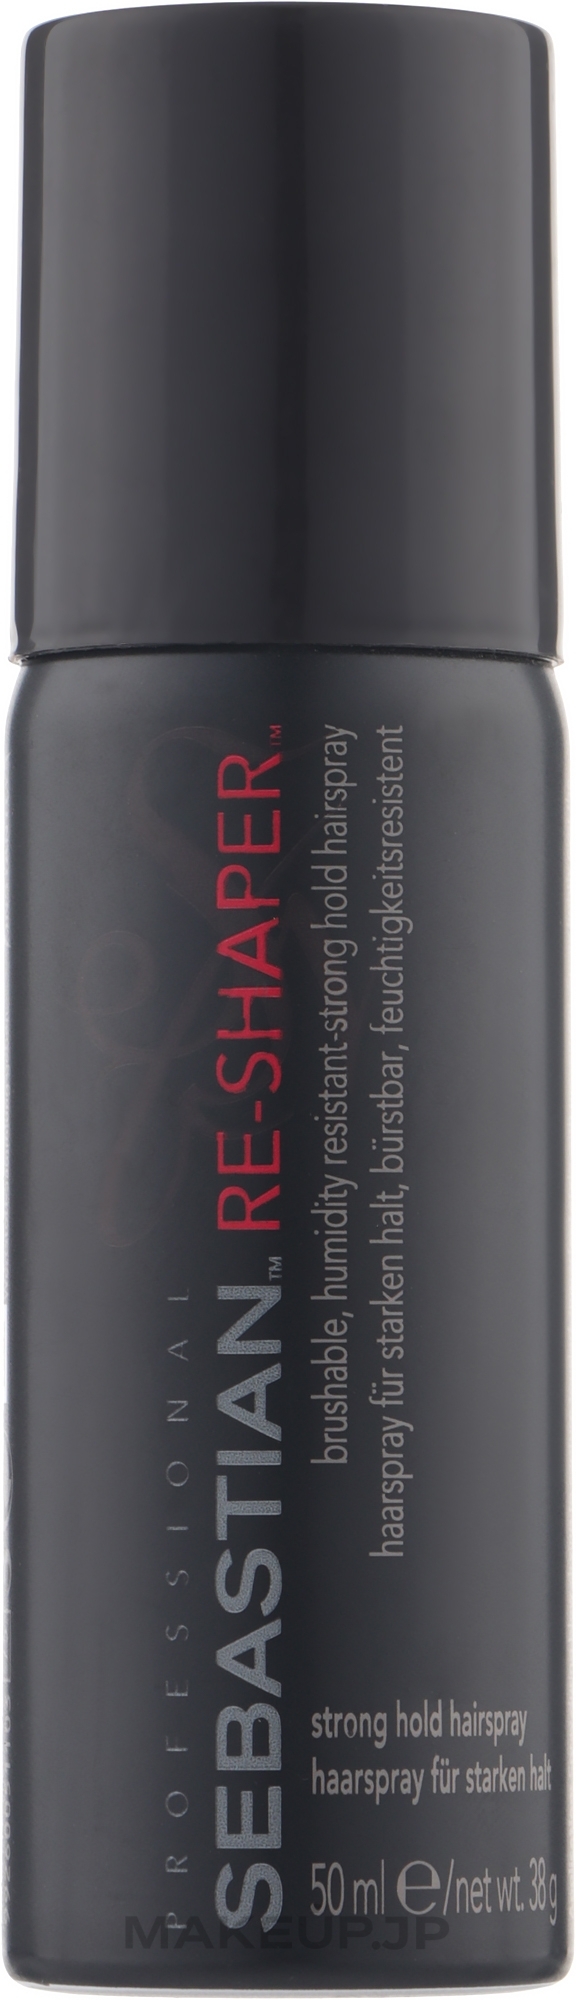 Strong Hold Humidity Resistant Hair Spray - Sebastian Professional Re-Shaper — photo 50 ml